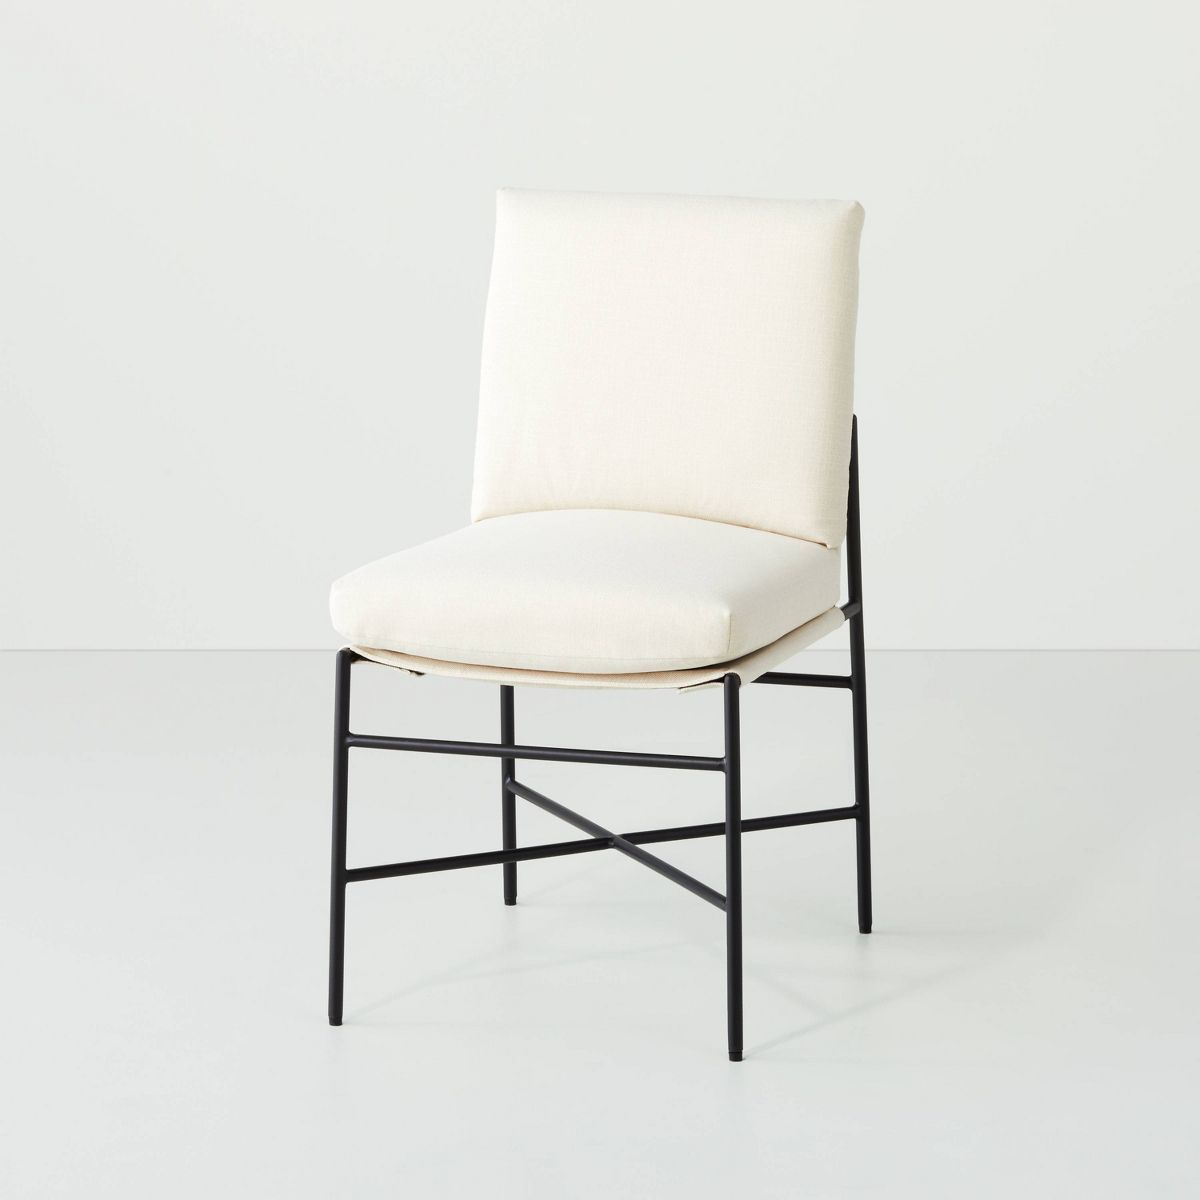 Fabric & Metal Armless Dining Chair - Cream/Black - Hearth & Hand™ with Magnolia | Target